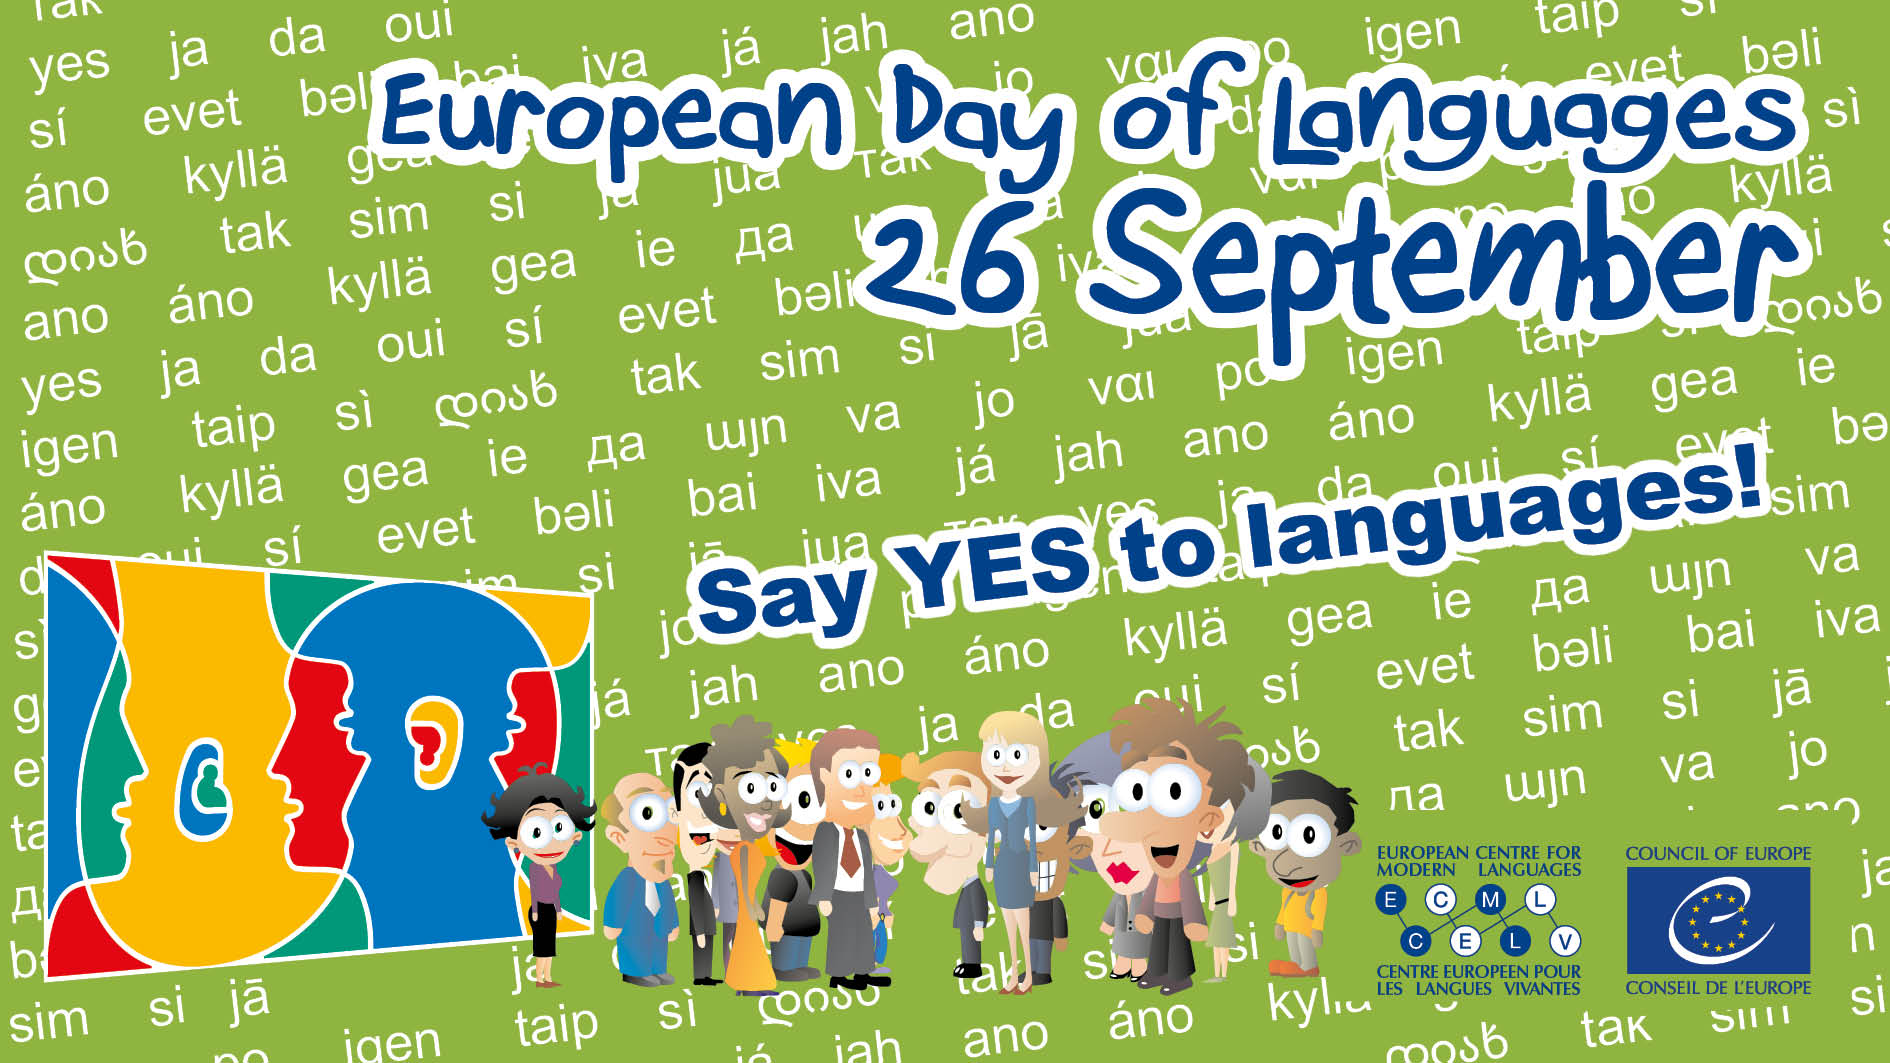 "Say YES to languages!" – Happy European Day of Languages!